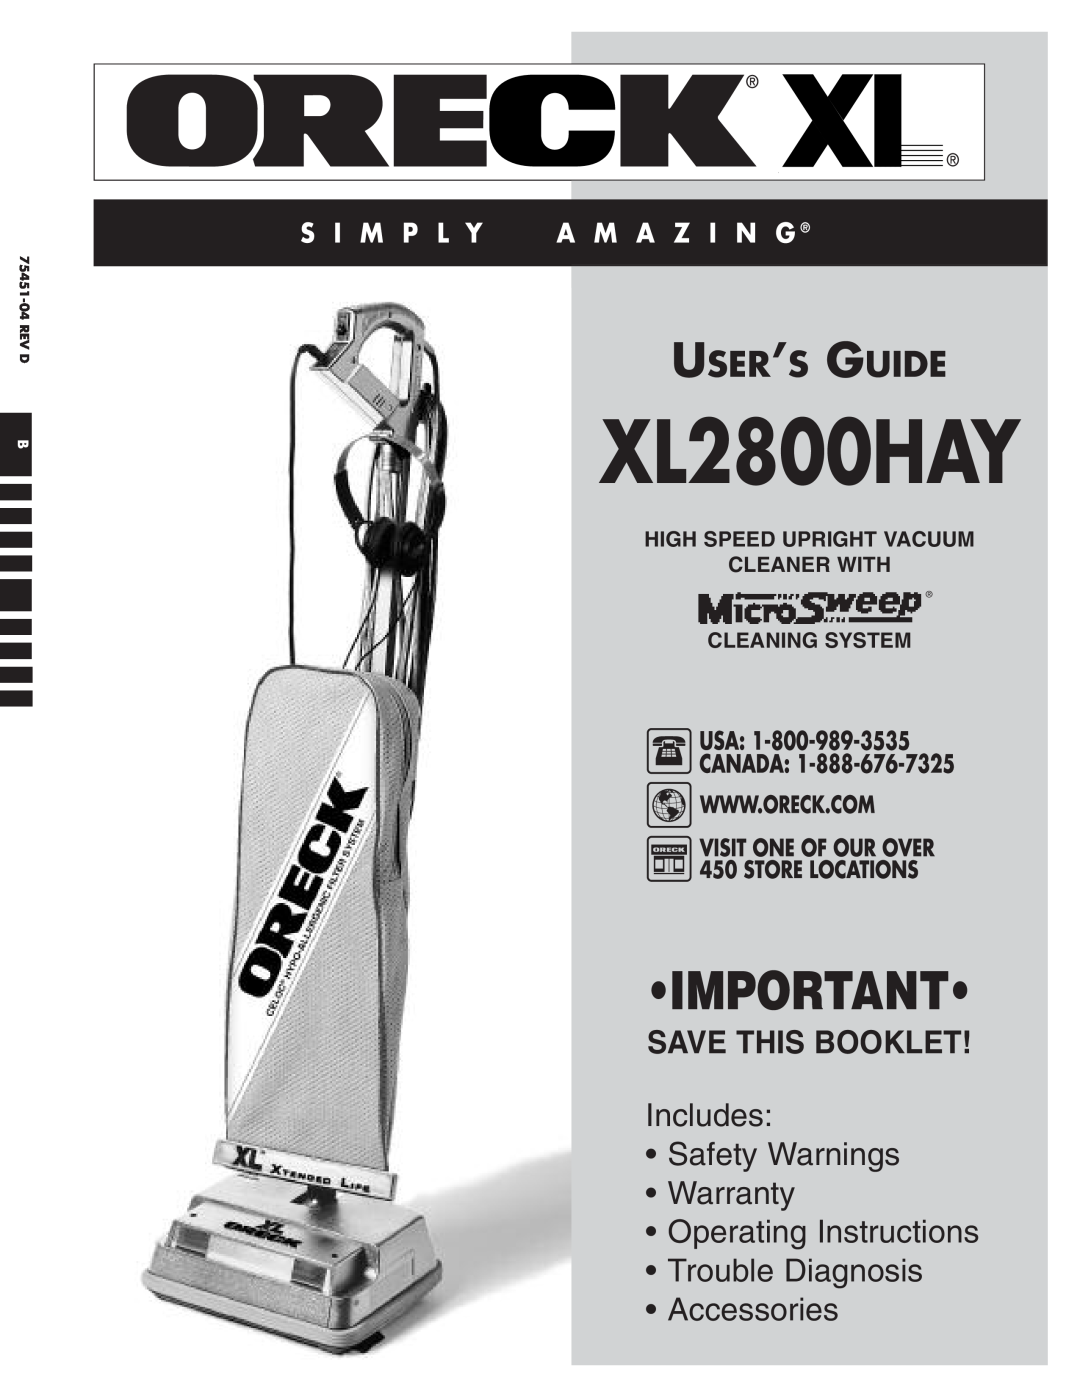 Oreck XL2800HAY warranty User’S Guide, High Speed Upright Vacuum Cleaner With, Cleaning System, Save This Booklet, Rev D 